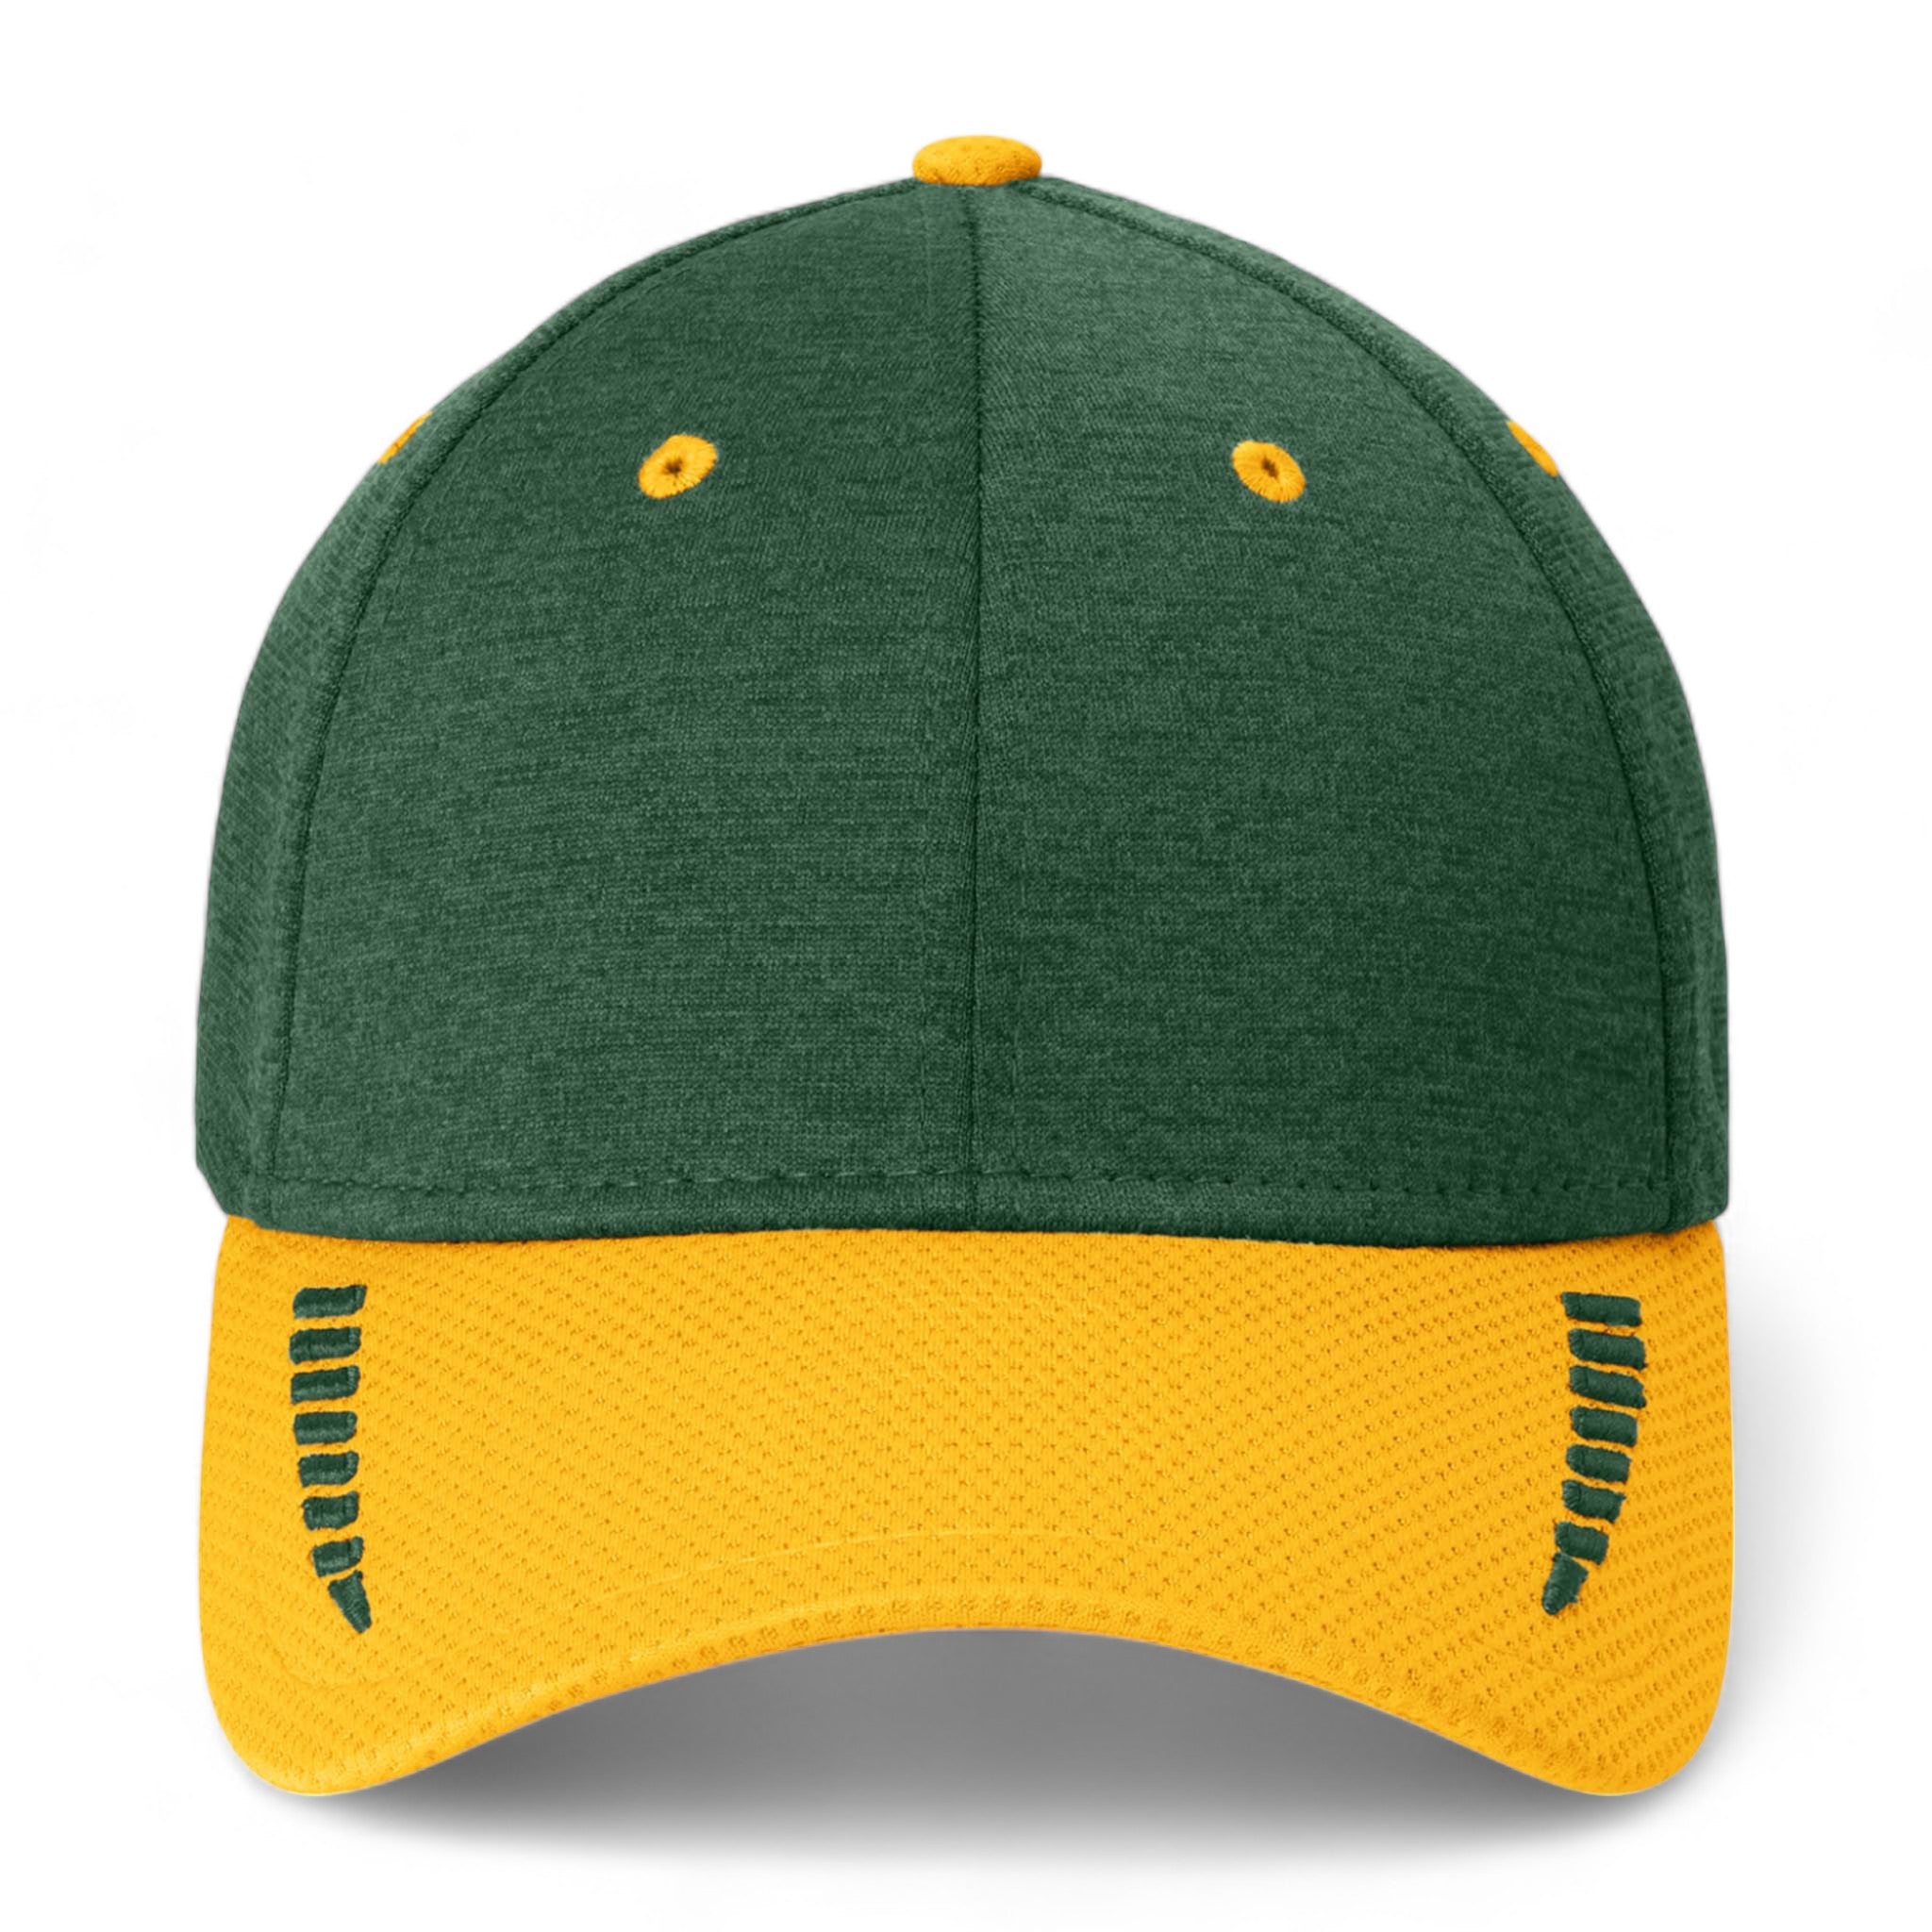 Front view of New Era NE704 custom hat in gold and dark green shadow heather